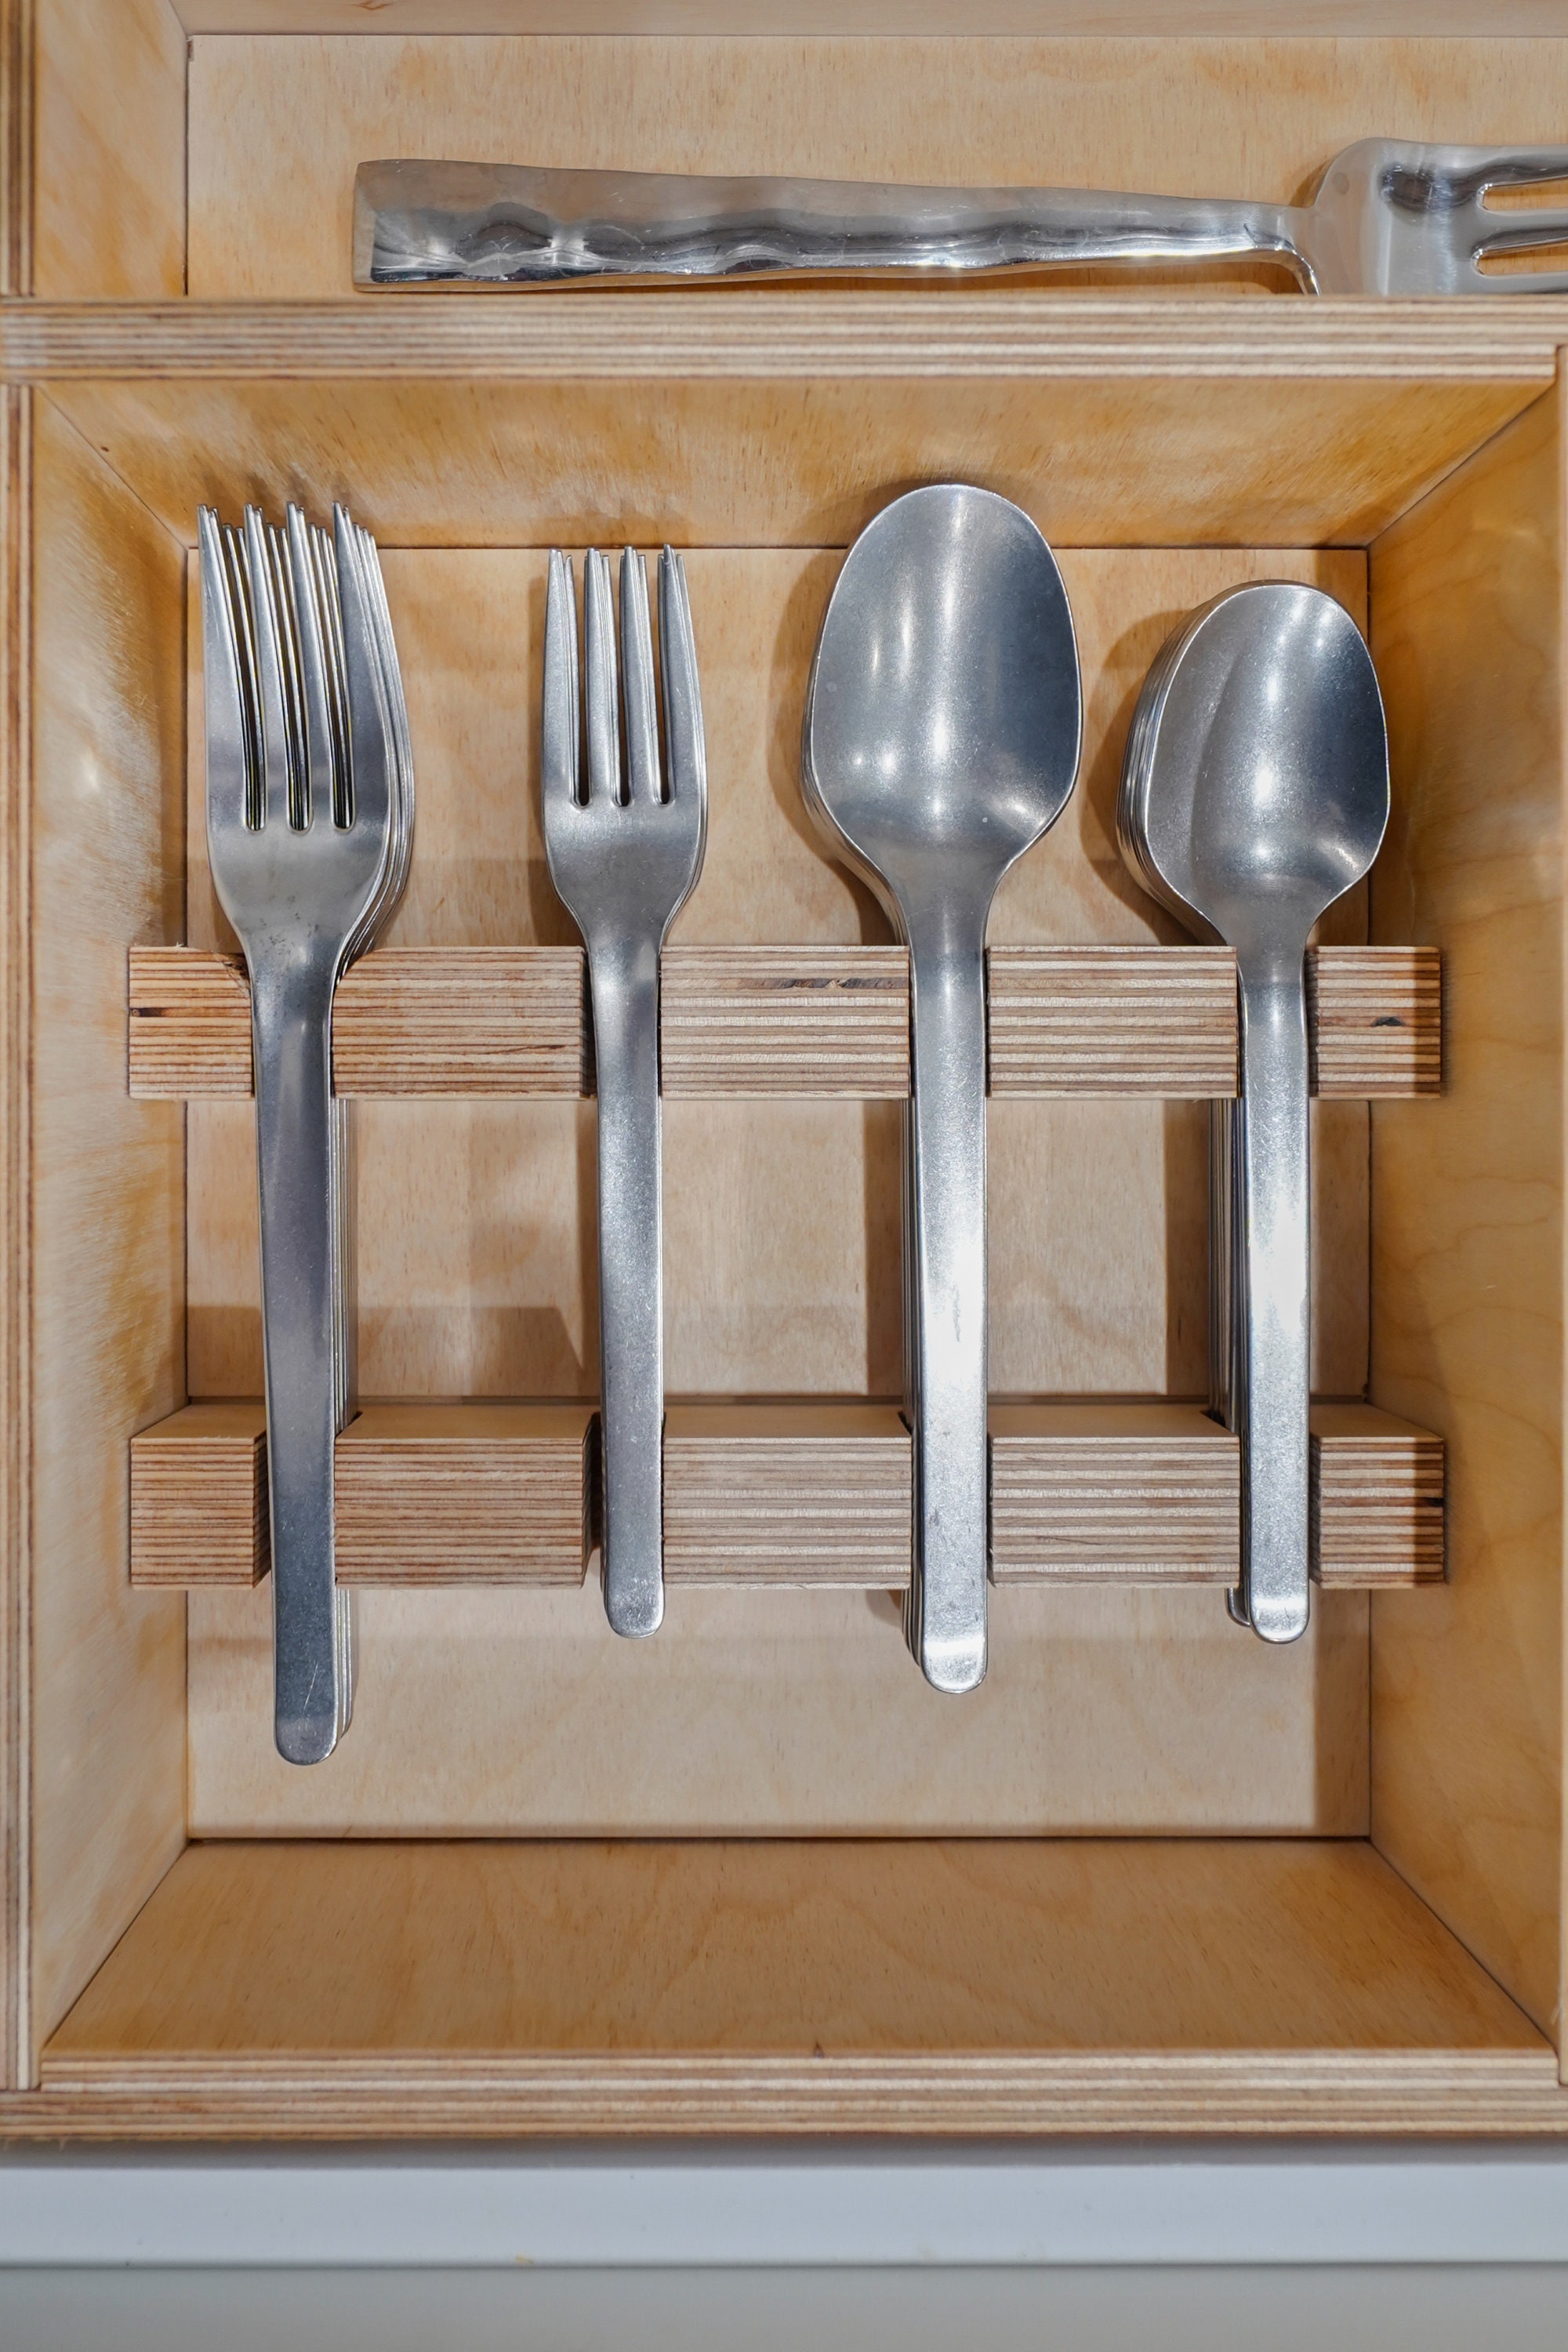 Custom Kitchen Drawer Organizer With Individual Cut Outs for Utensils and  Knives Custom Made From Solid Maple or Walnut 